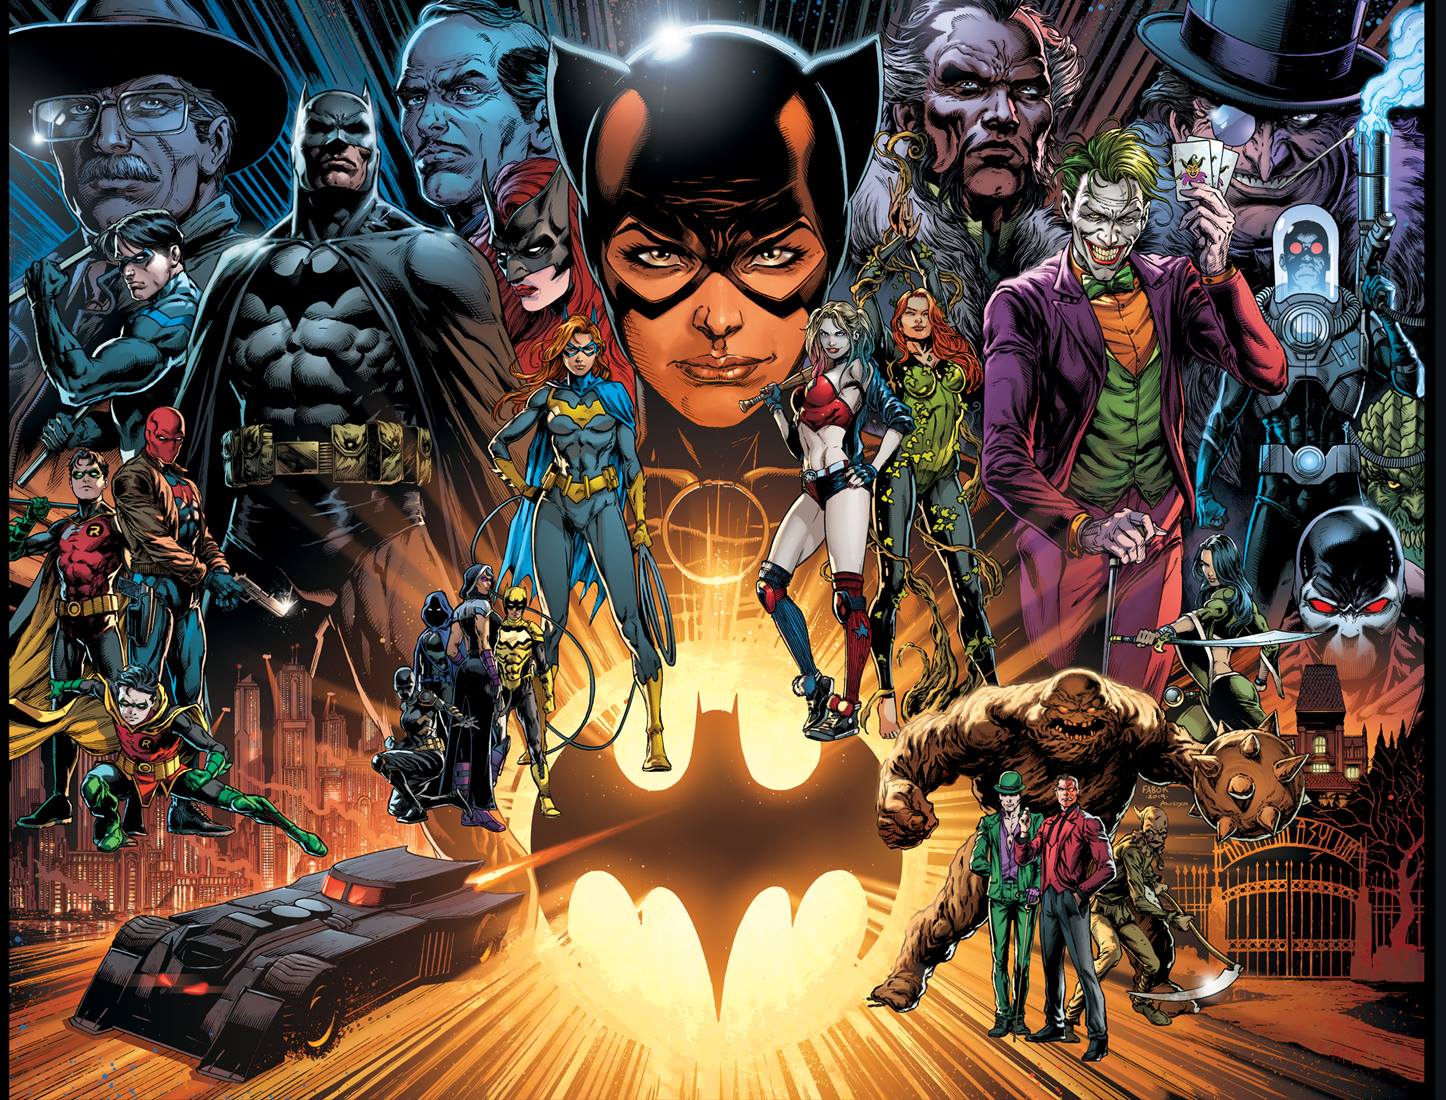 Creative Teams and Stories For Detective Comics #1000 Revealed